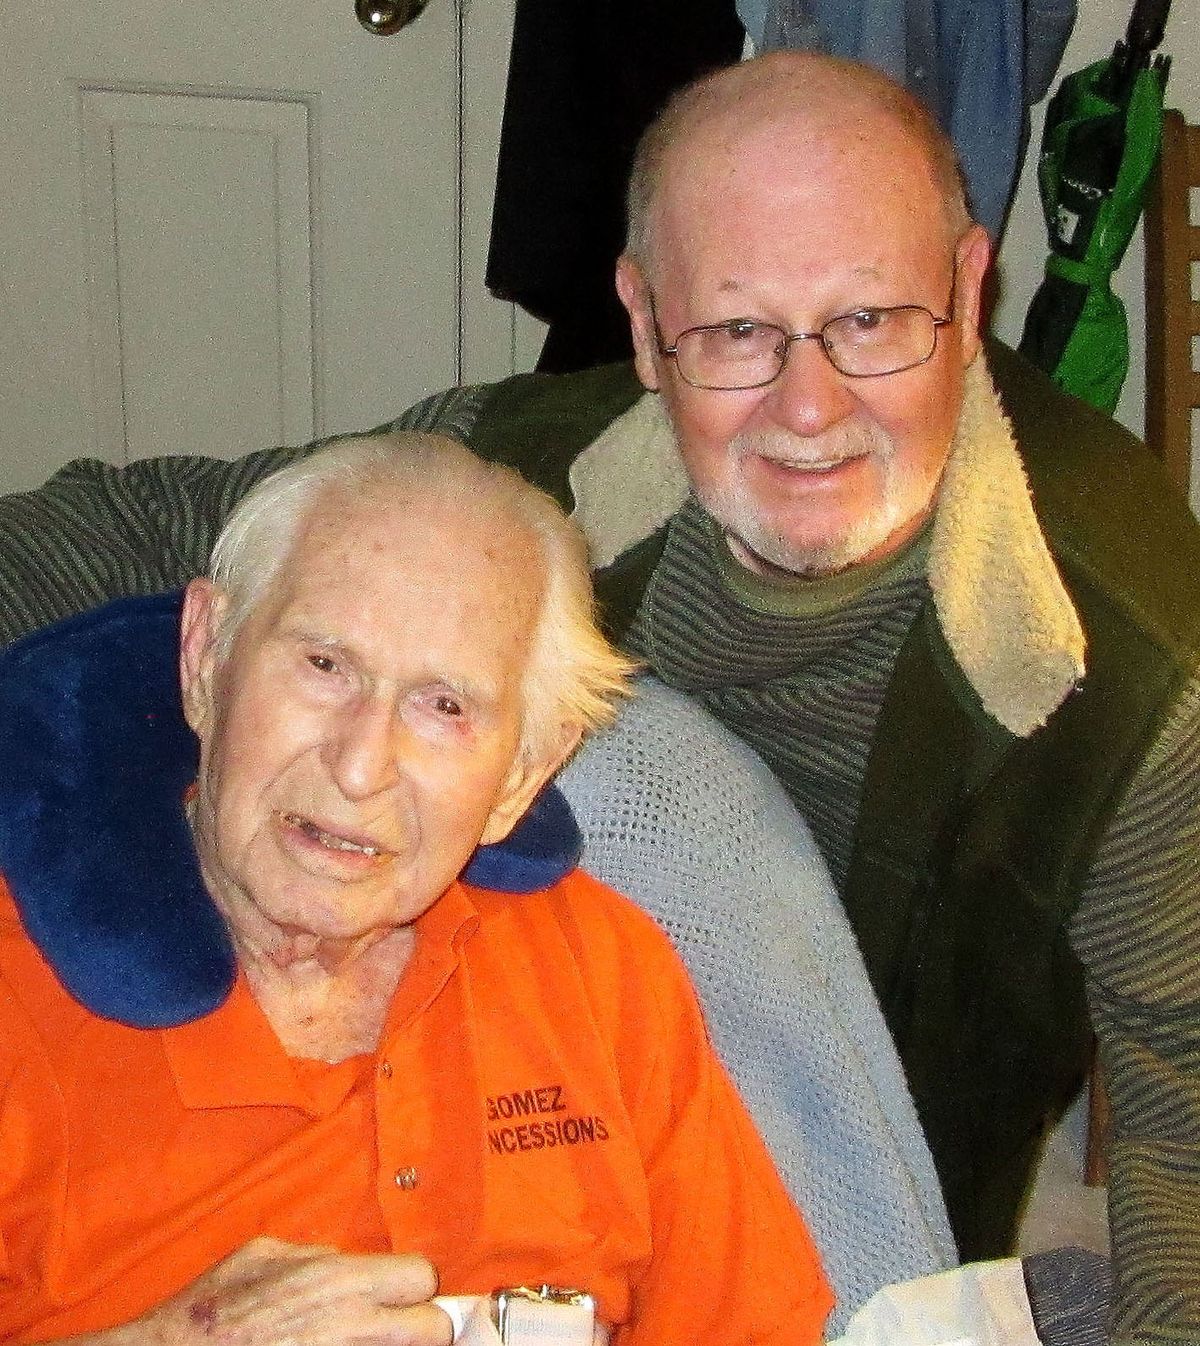 Richard A. Hodge, right, recently met his real father, Richard L. Hodge, for the first time since he was an infant.